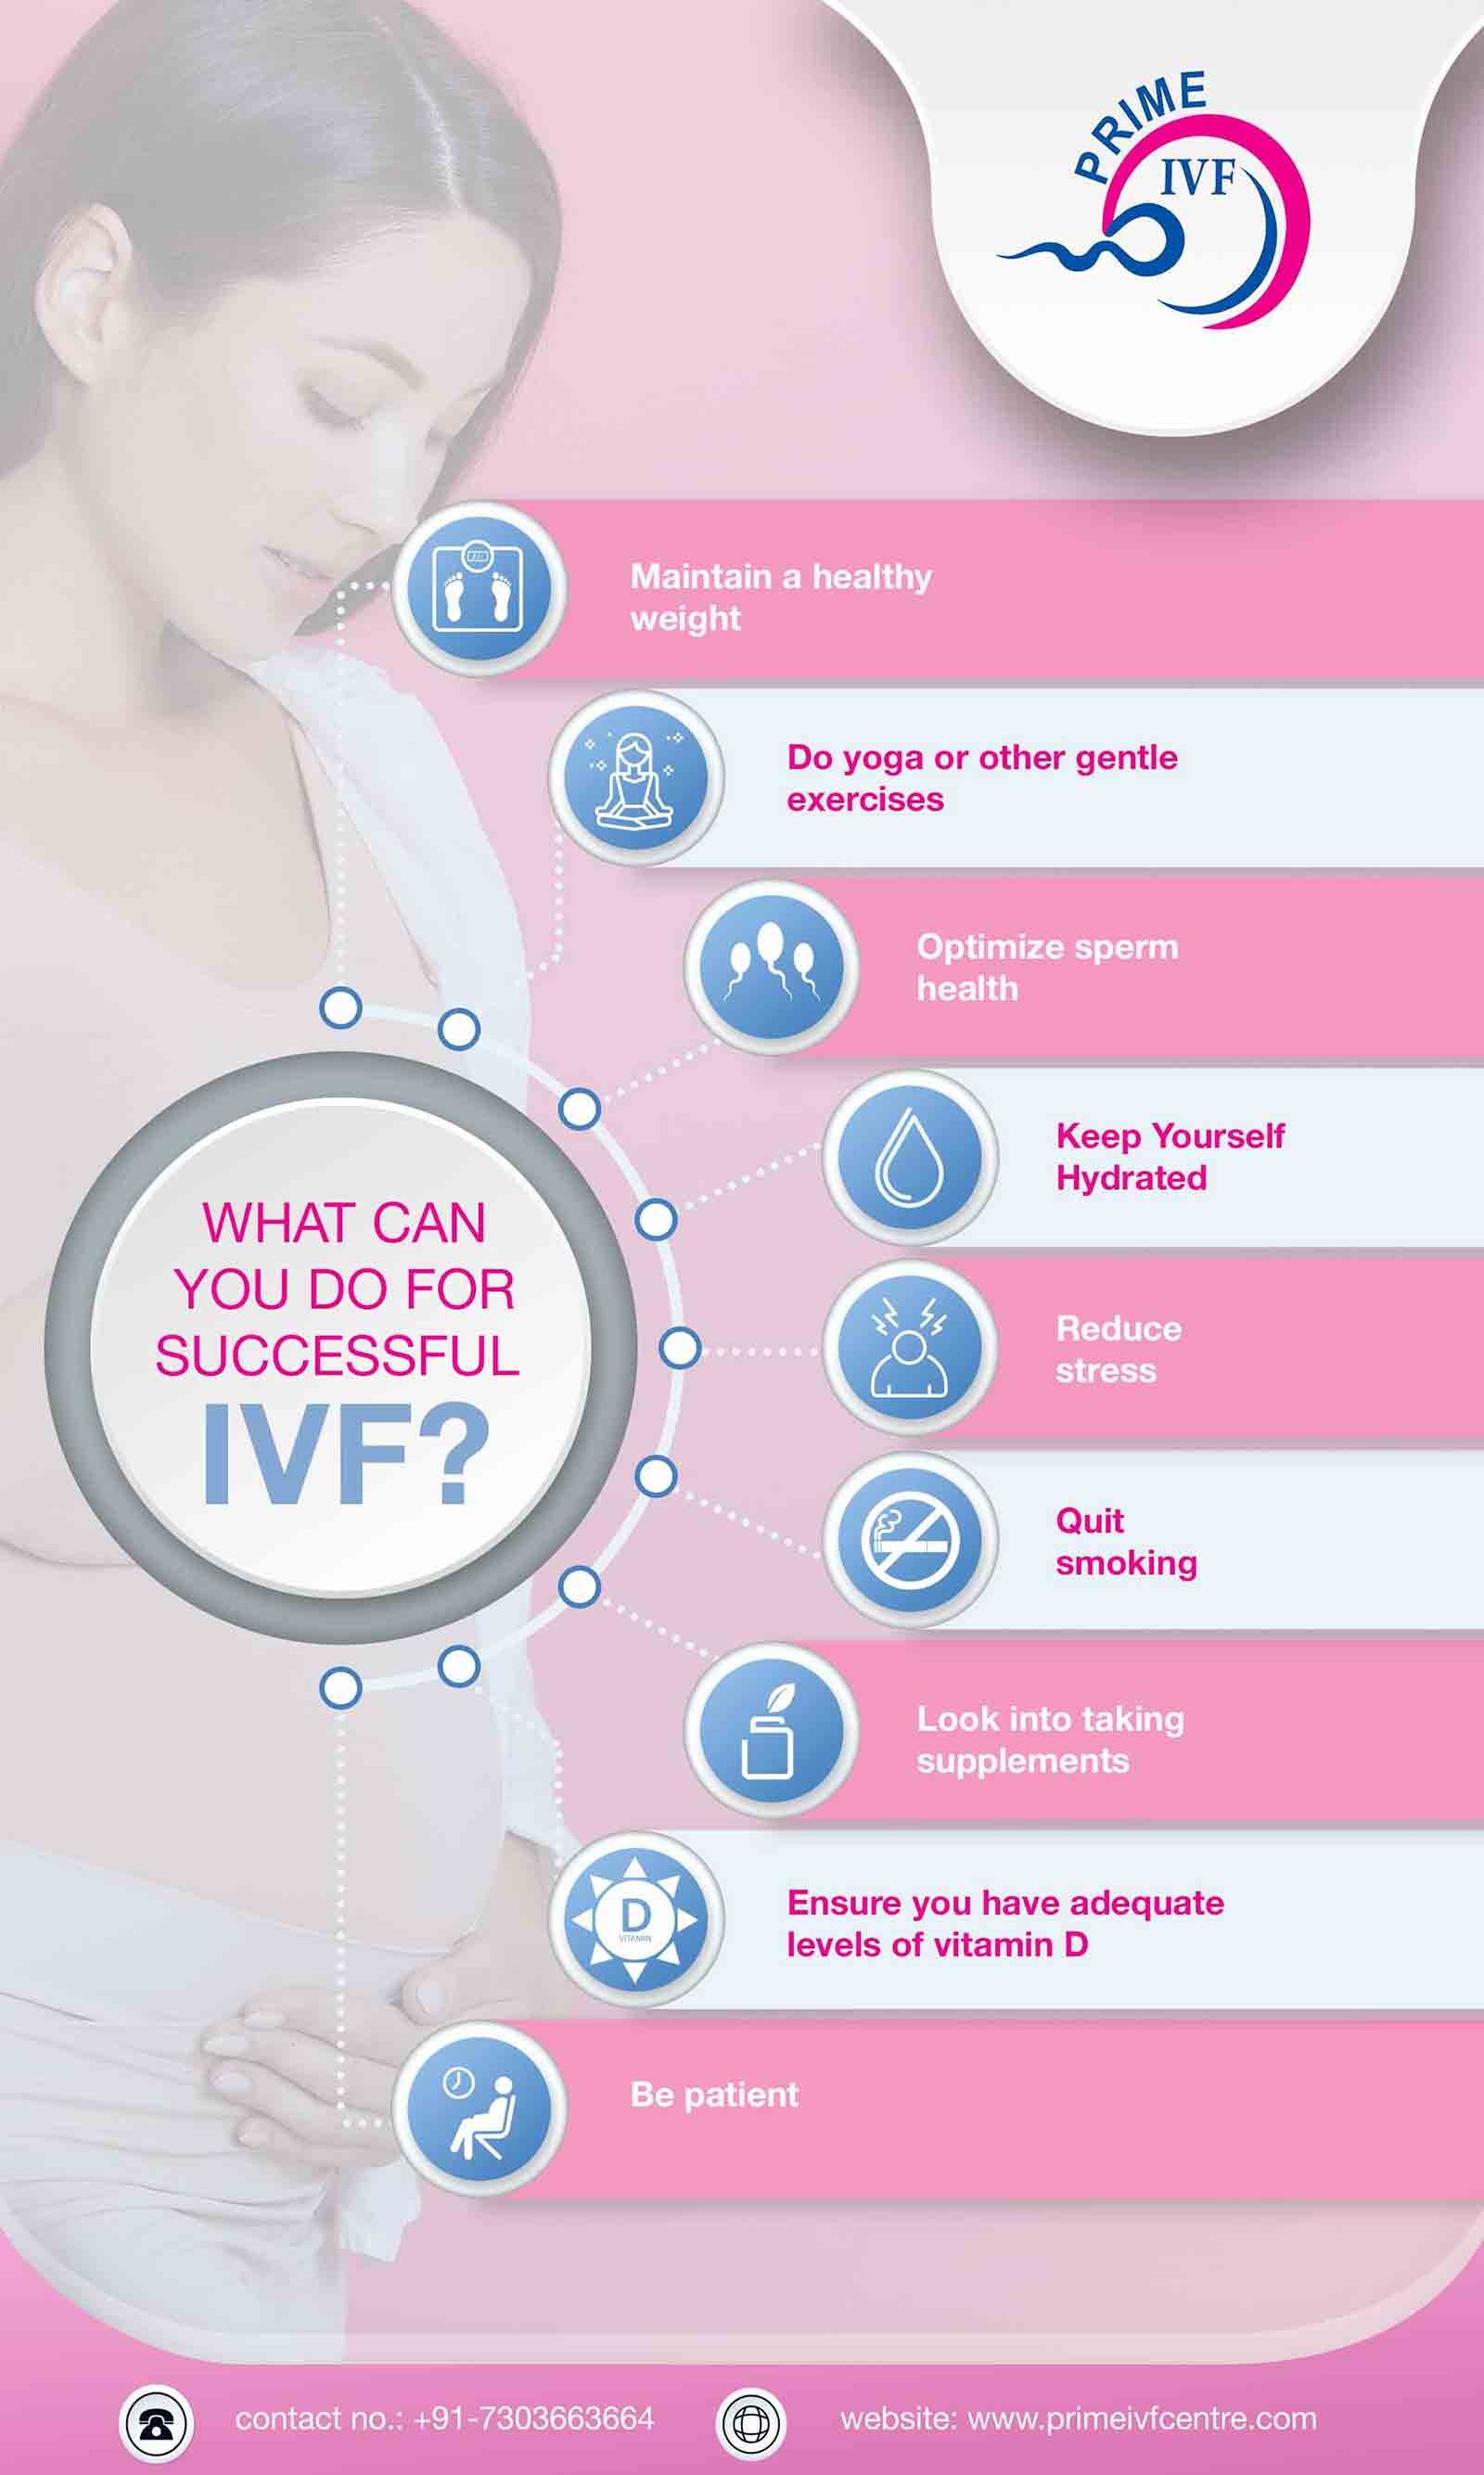 Foods to Eat & Foods to avoid during IVF Treatment